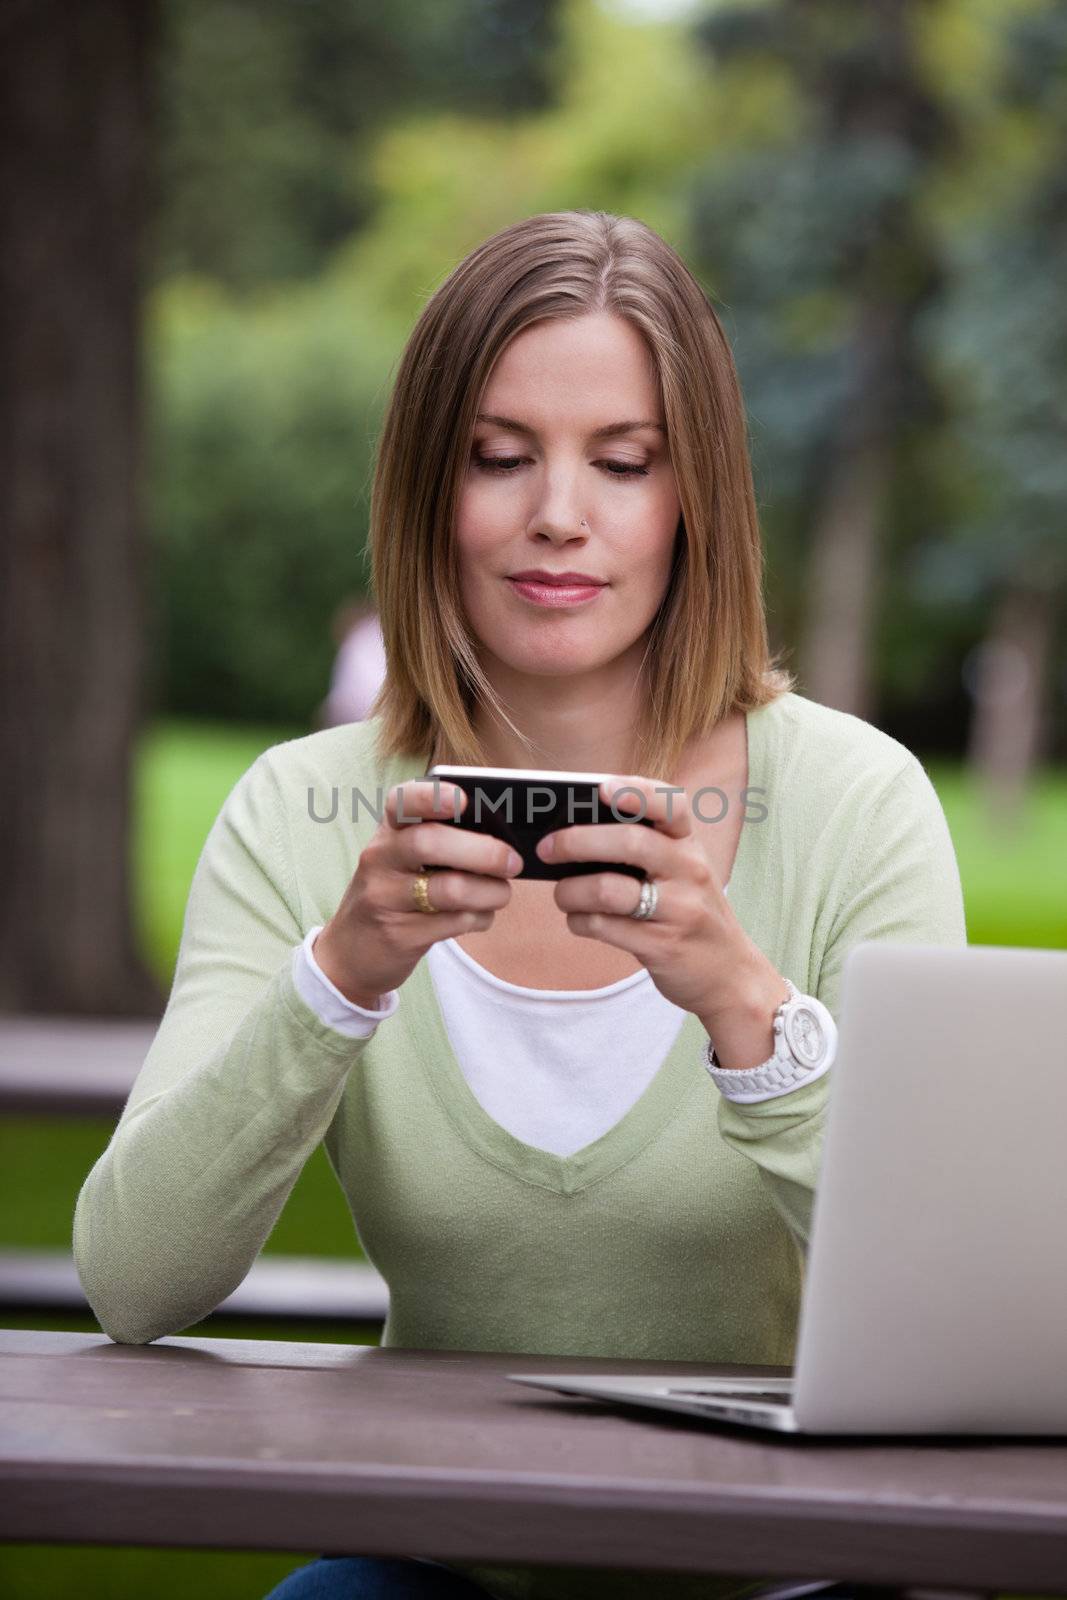 Woman creating a status update with mobile phone in park